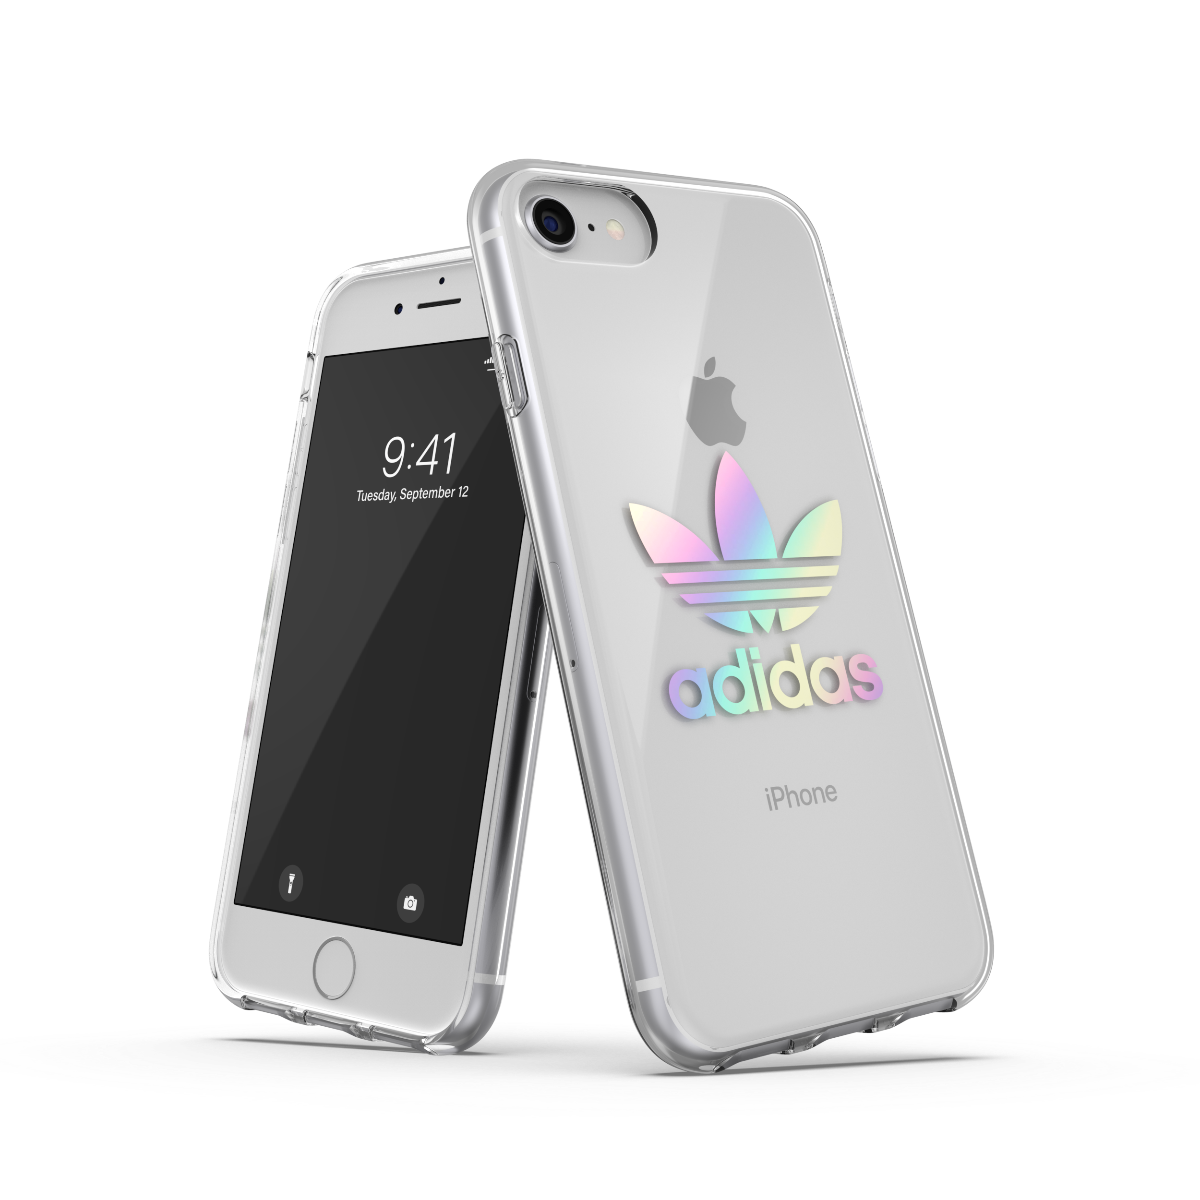 Vacante Universal ir a buscar Buy Clear snap case Holographic iPhone | adidas-cases